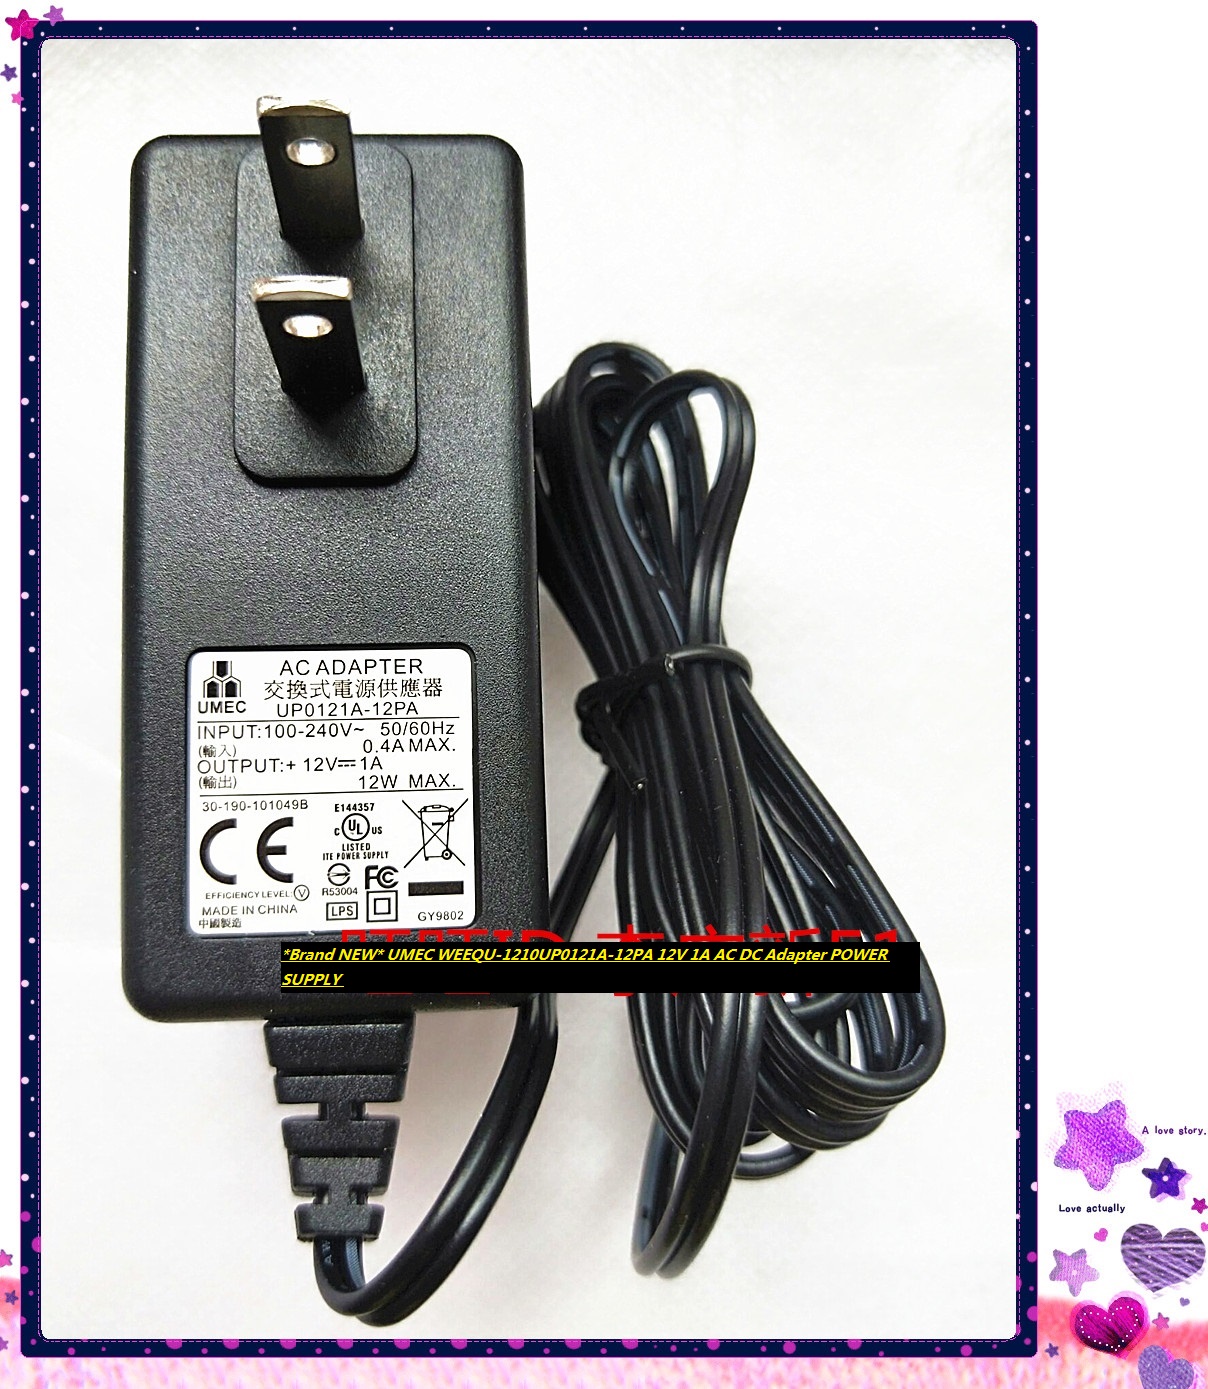 *Brand NEW* UMEC WEEQU-1210UP0121A-12PA 12V 1A AC DC Adapter POWER SUPPLY